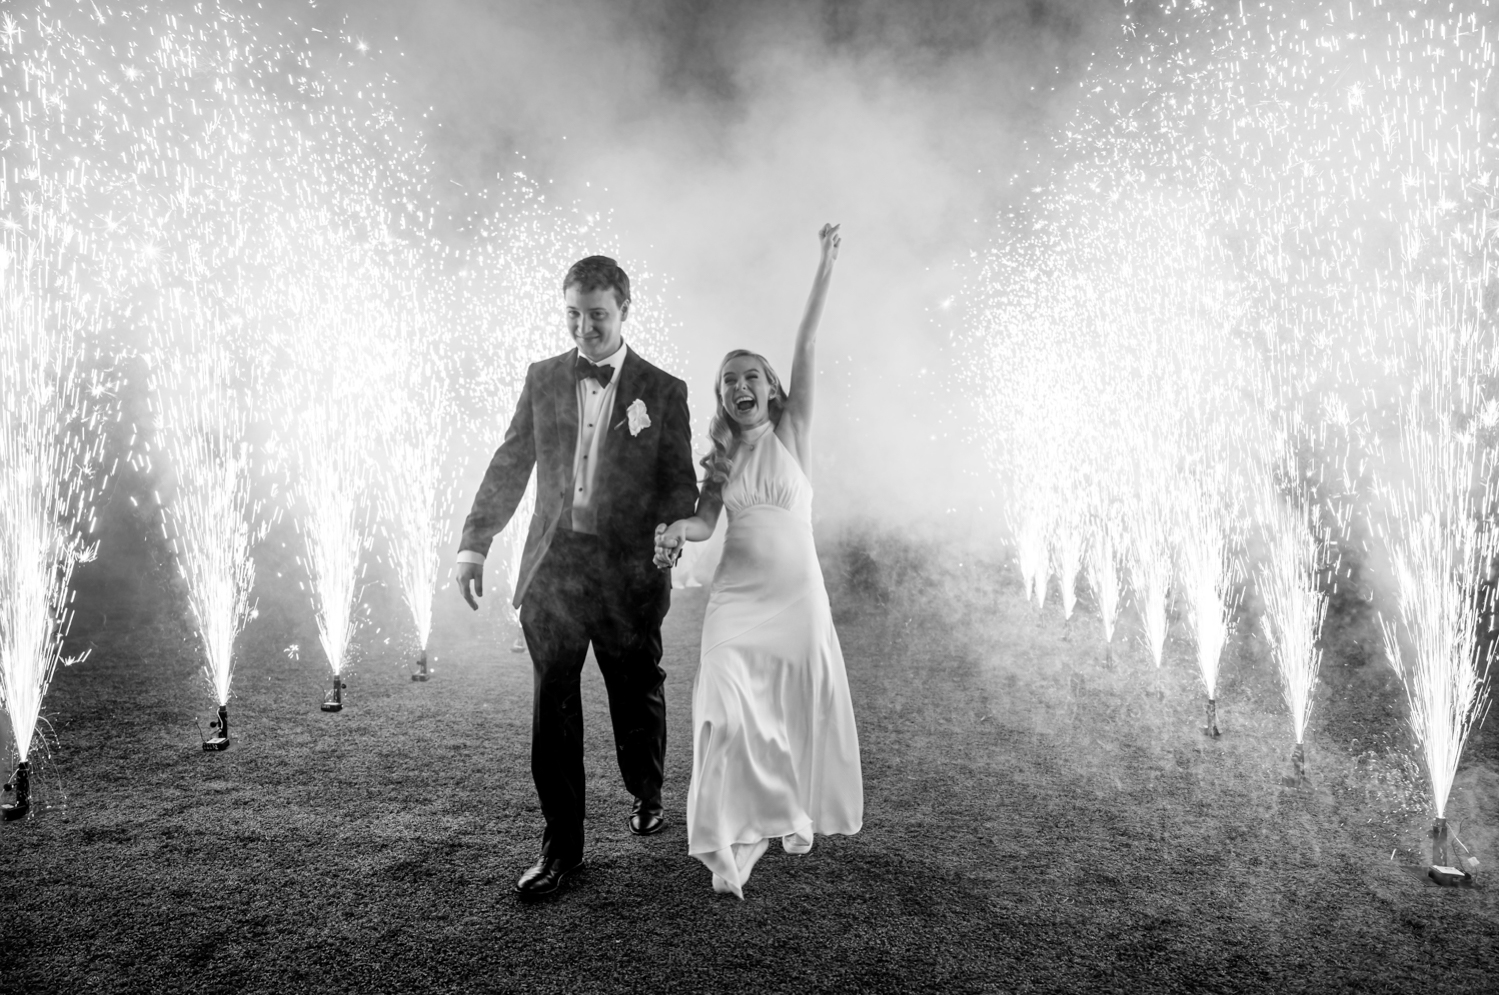 The bride and groom exit the wedding through a tunnel of pyrotechnic sparklers. The bride smiles and pumps her fist in the air in excitement.